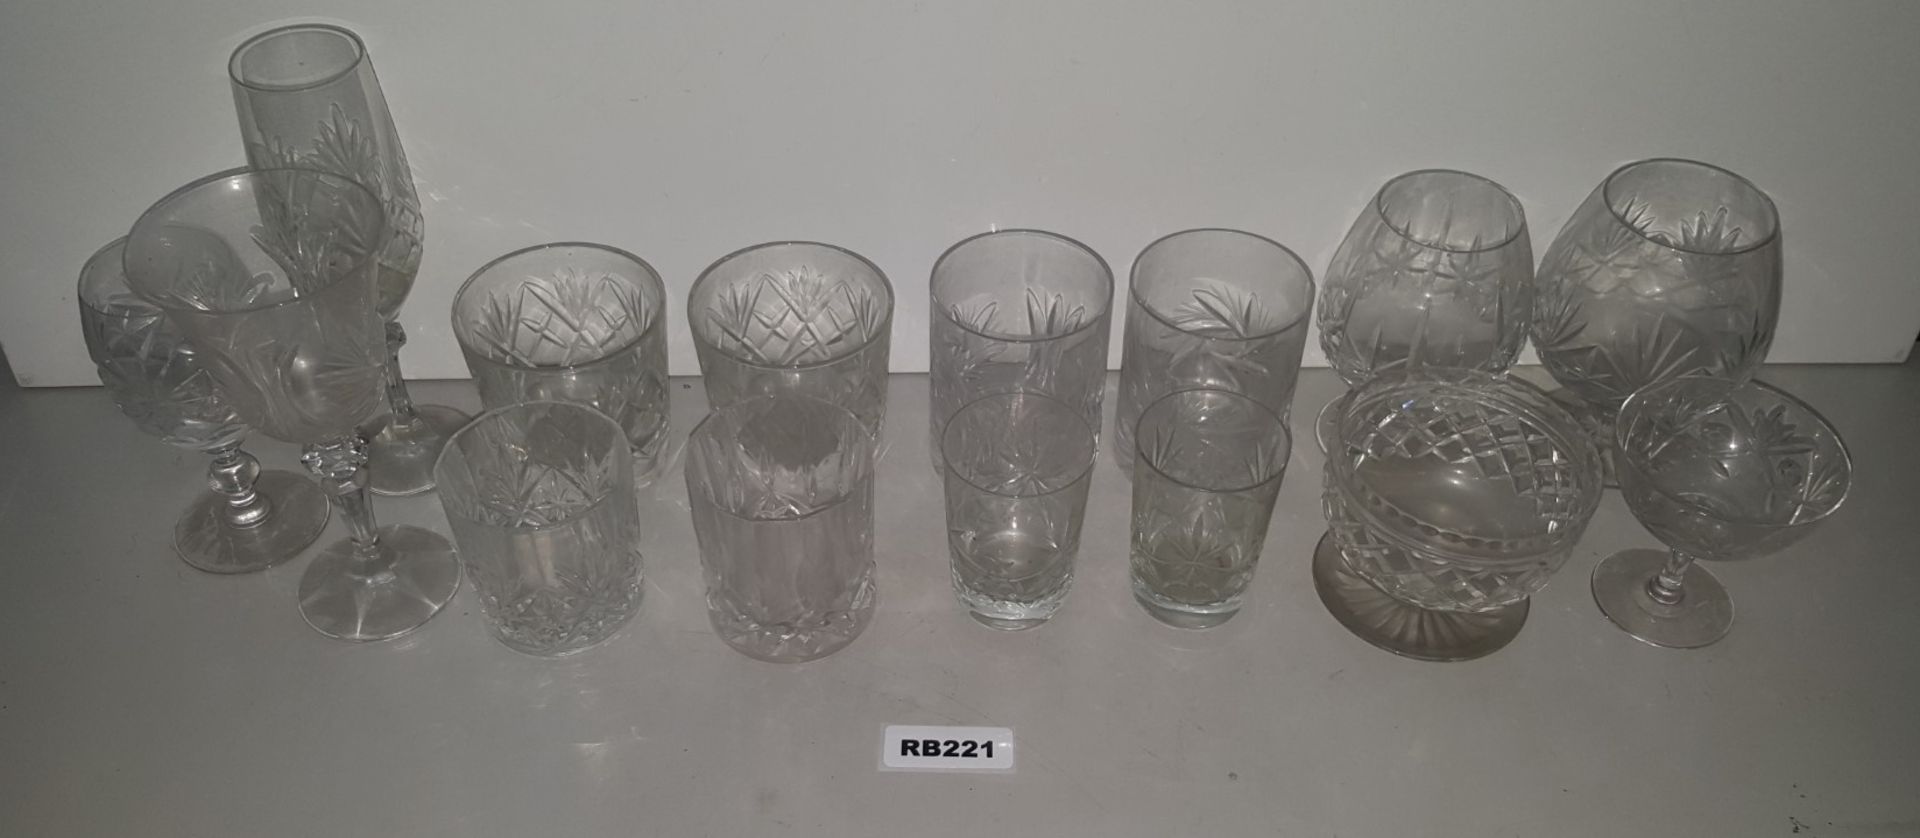 15 x Vintage Cut Glass Drinking Glasses - Ref RB221 I - Image 2 of 5